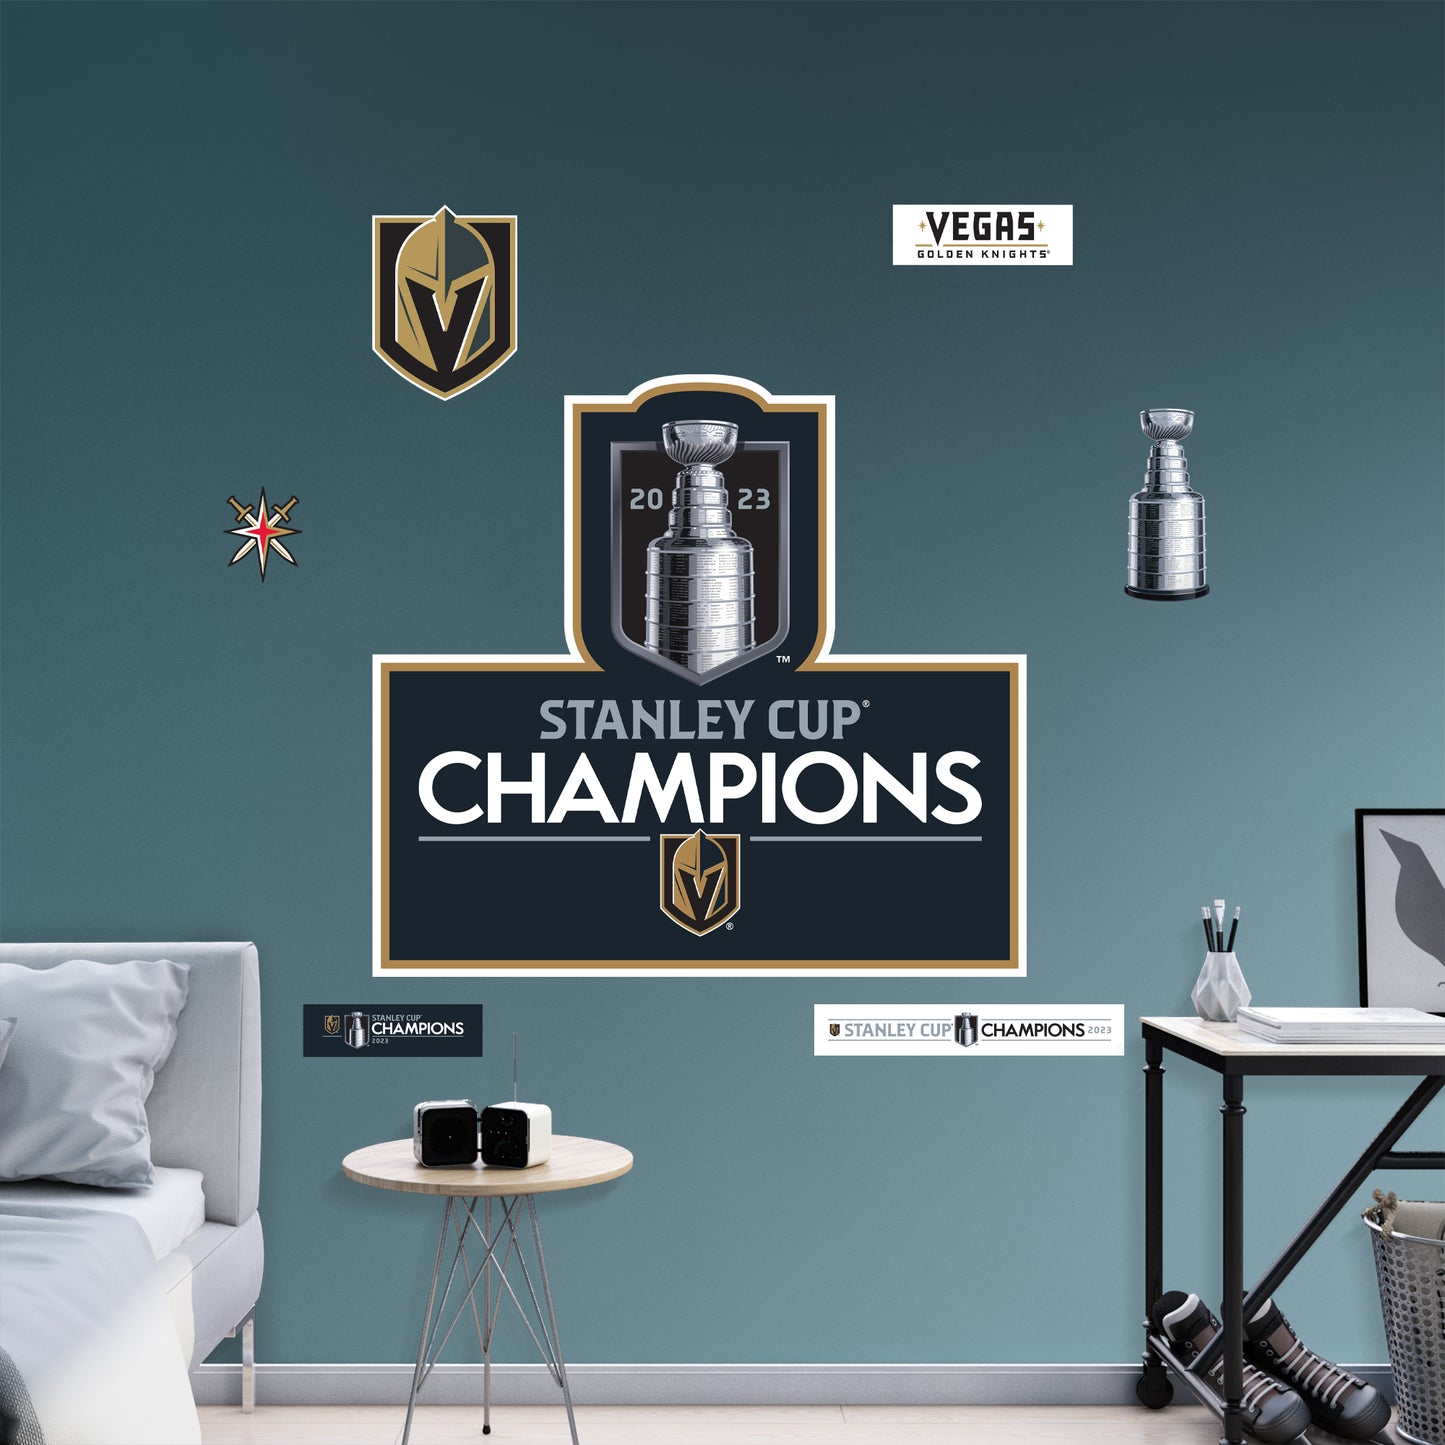 The Vegas Golden Knights Are Winners 2023 Stanley Cup Champions